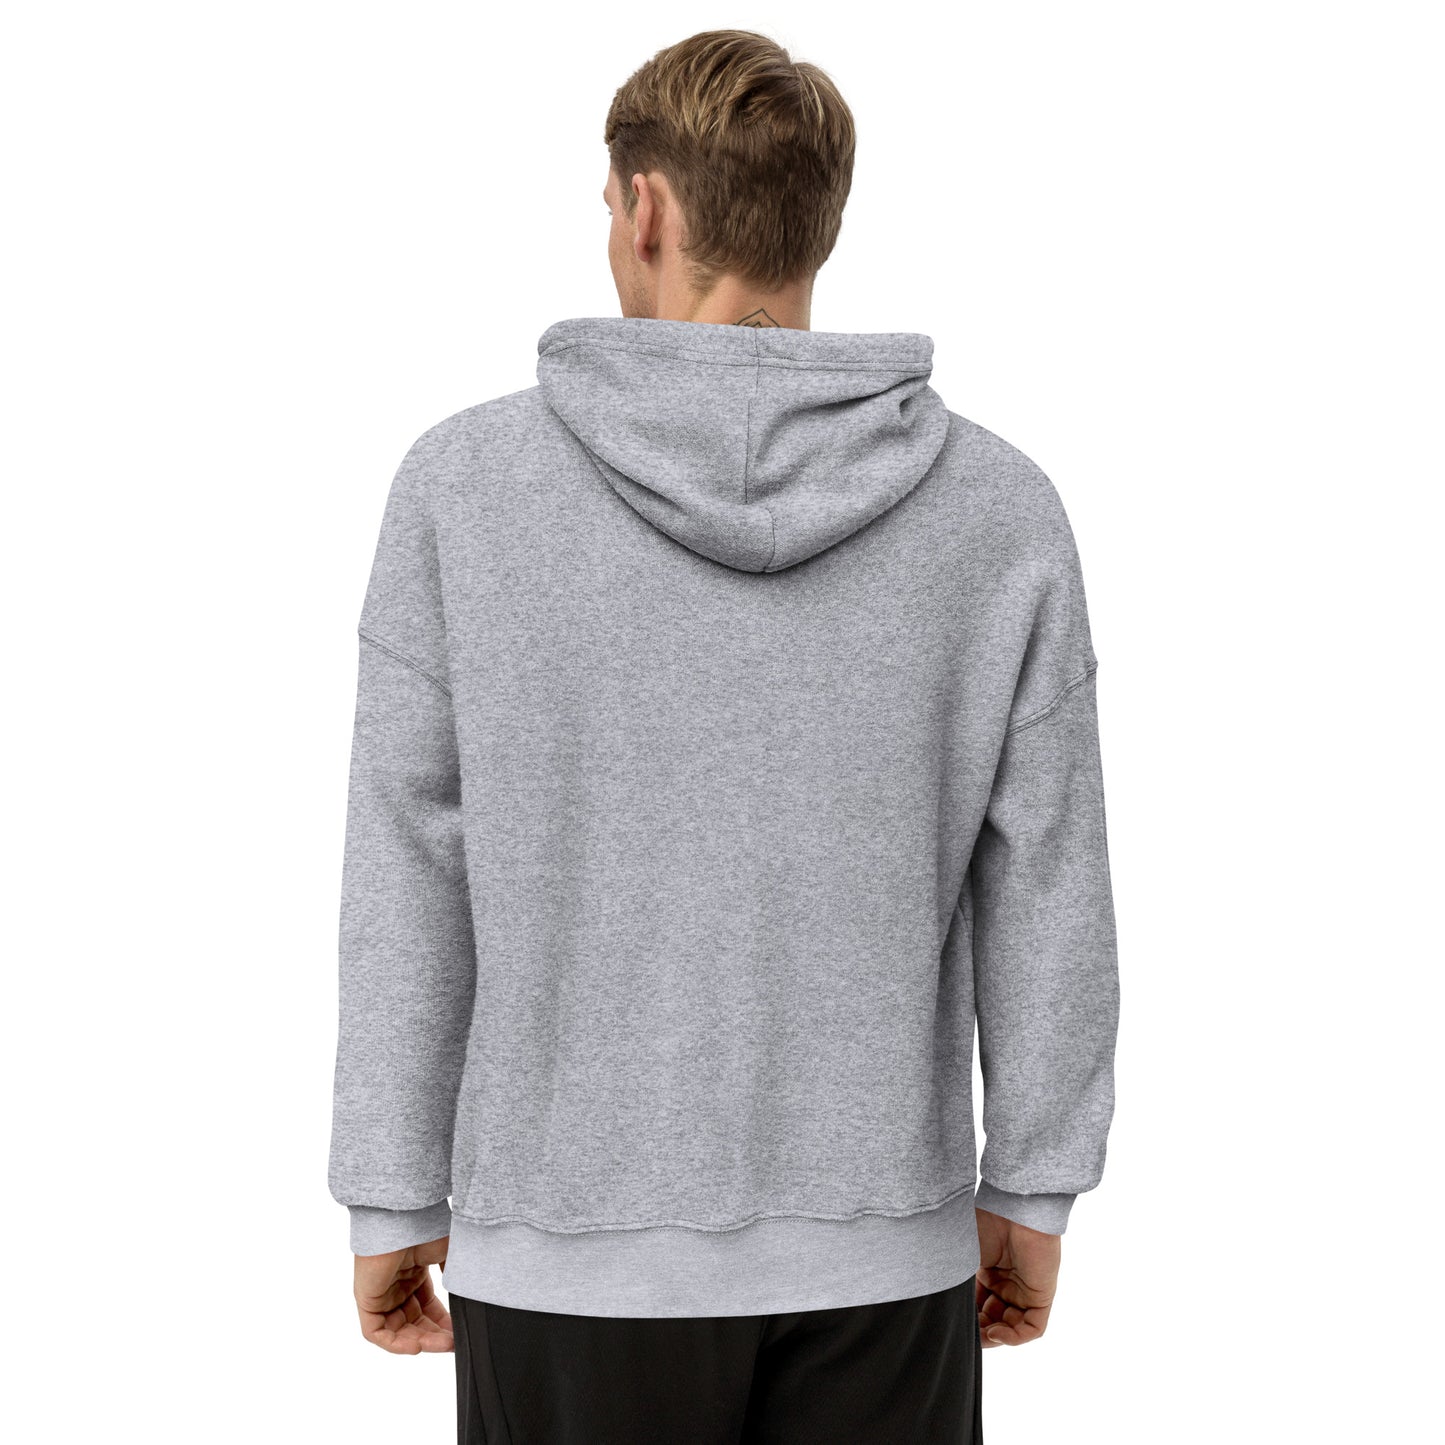 Unisex sueded fleece hoodie with Embroidery